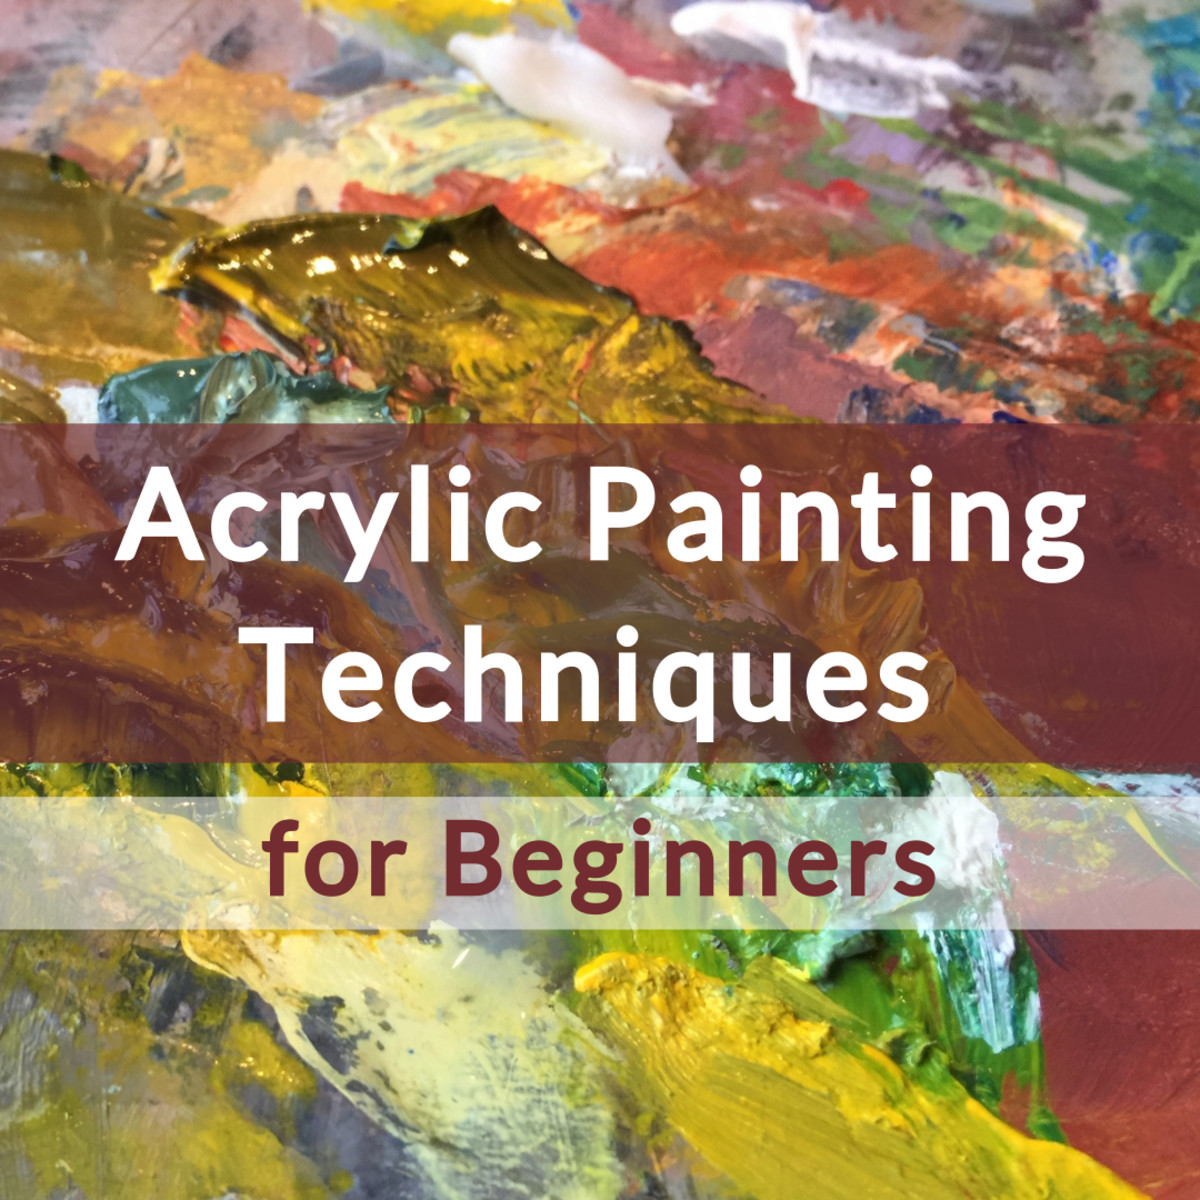 Acrylic paint has become the medium of choice for most beginner painters who enjoy its flexibility, durability, and easiness to correct mistakes.